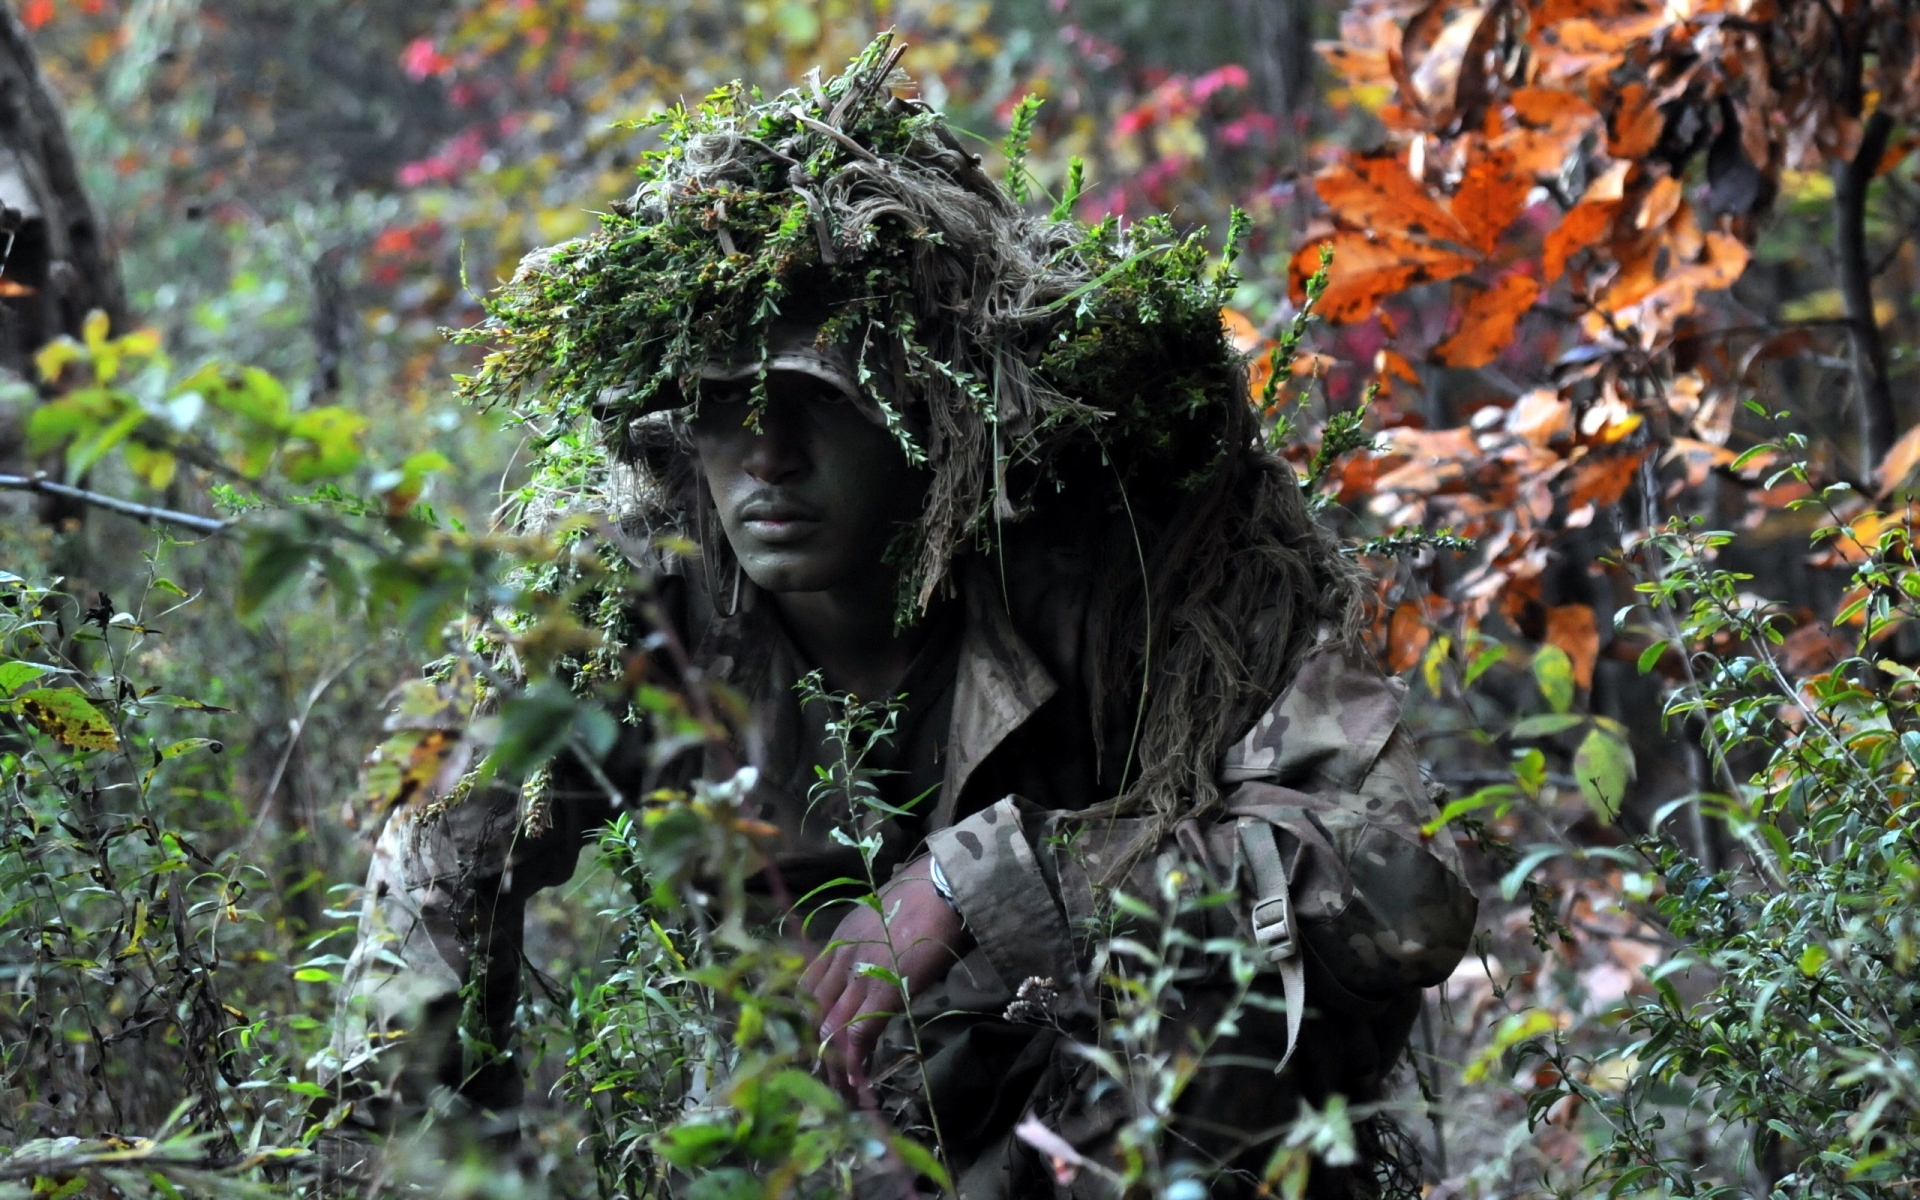 Soldier Camouflage military wallpaper 1920x1200 46791 1920x1200